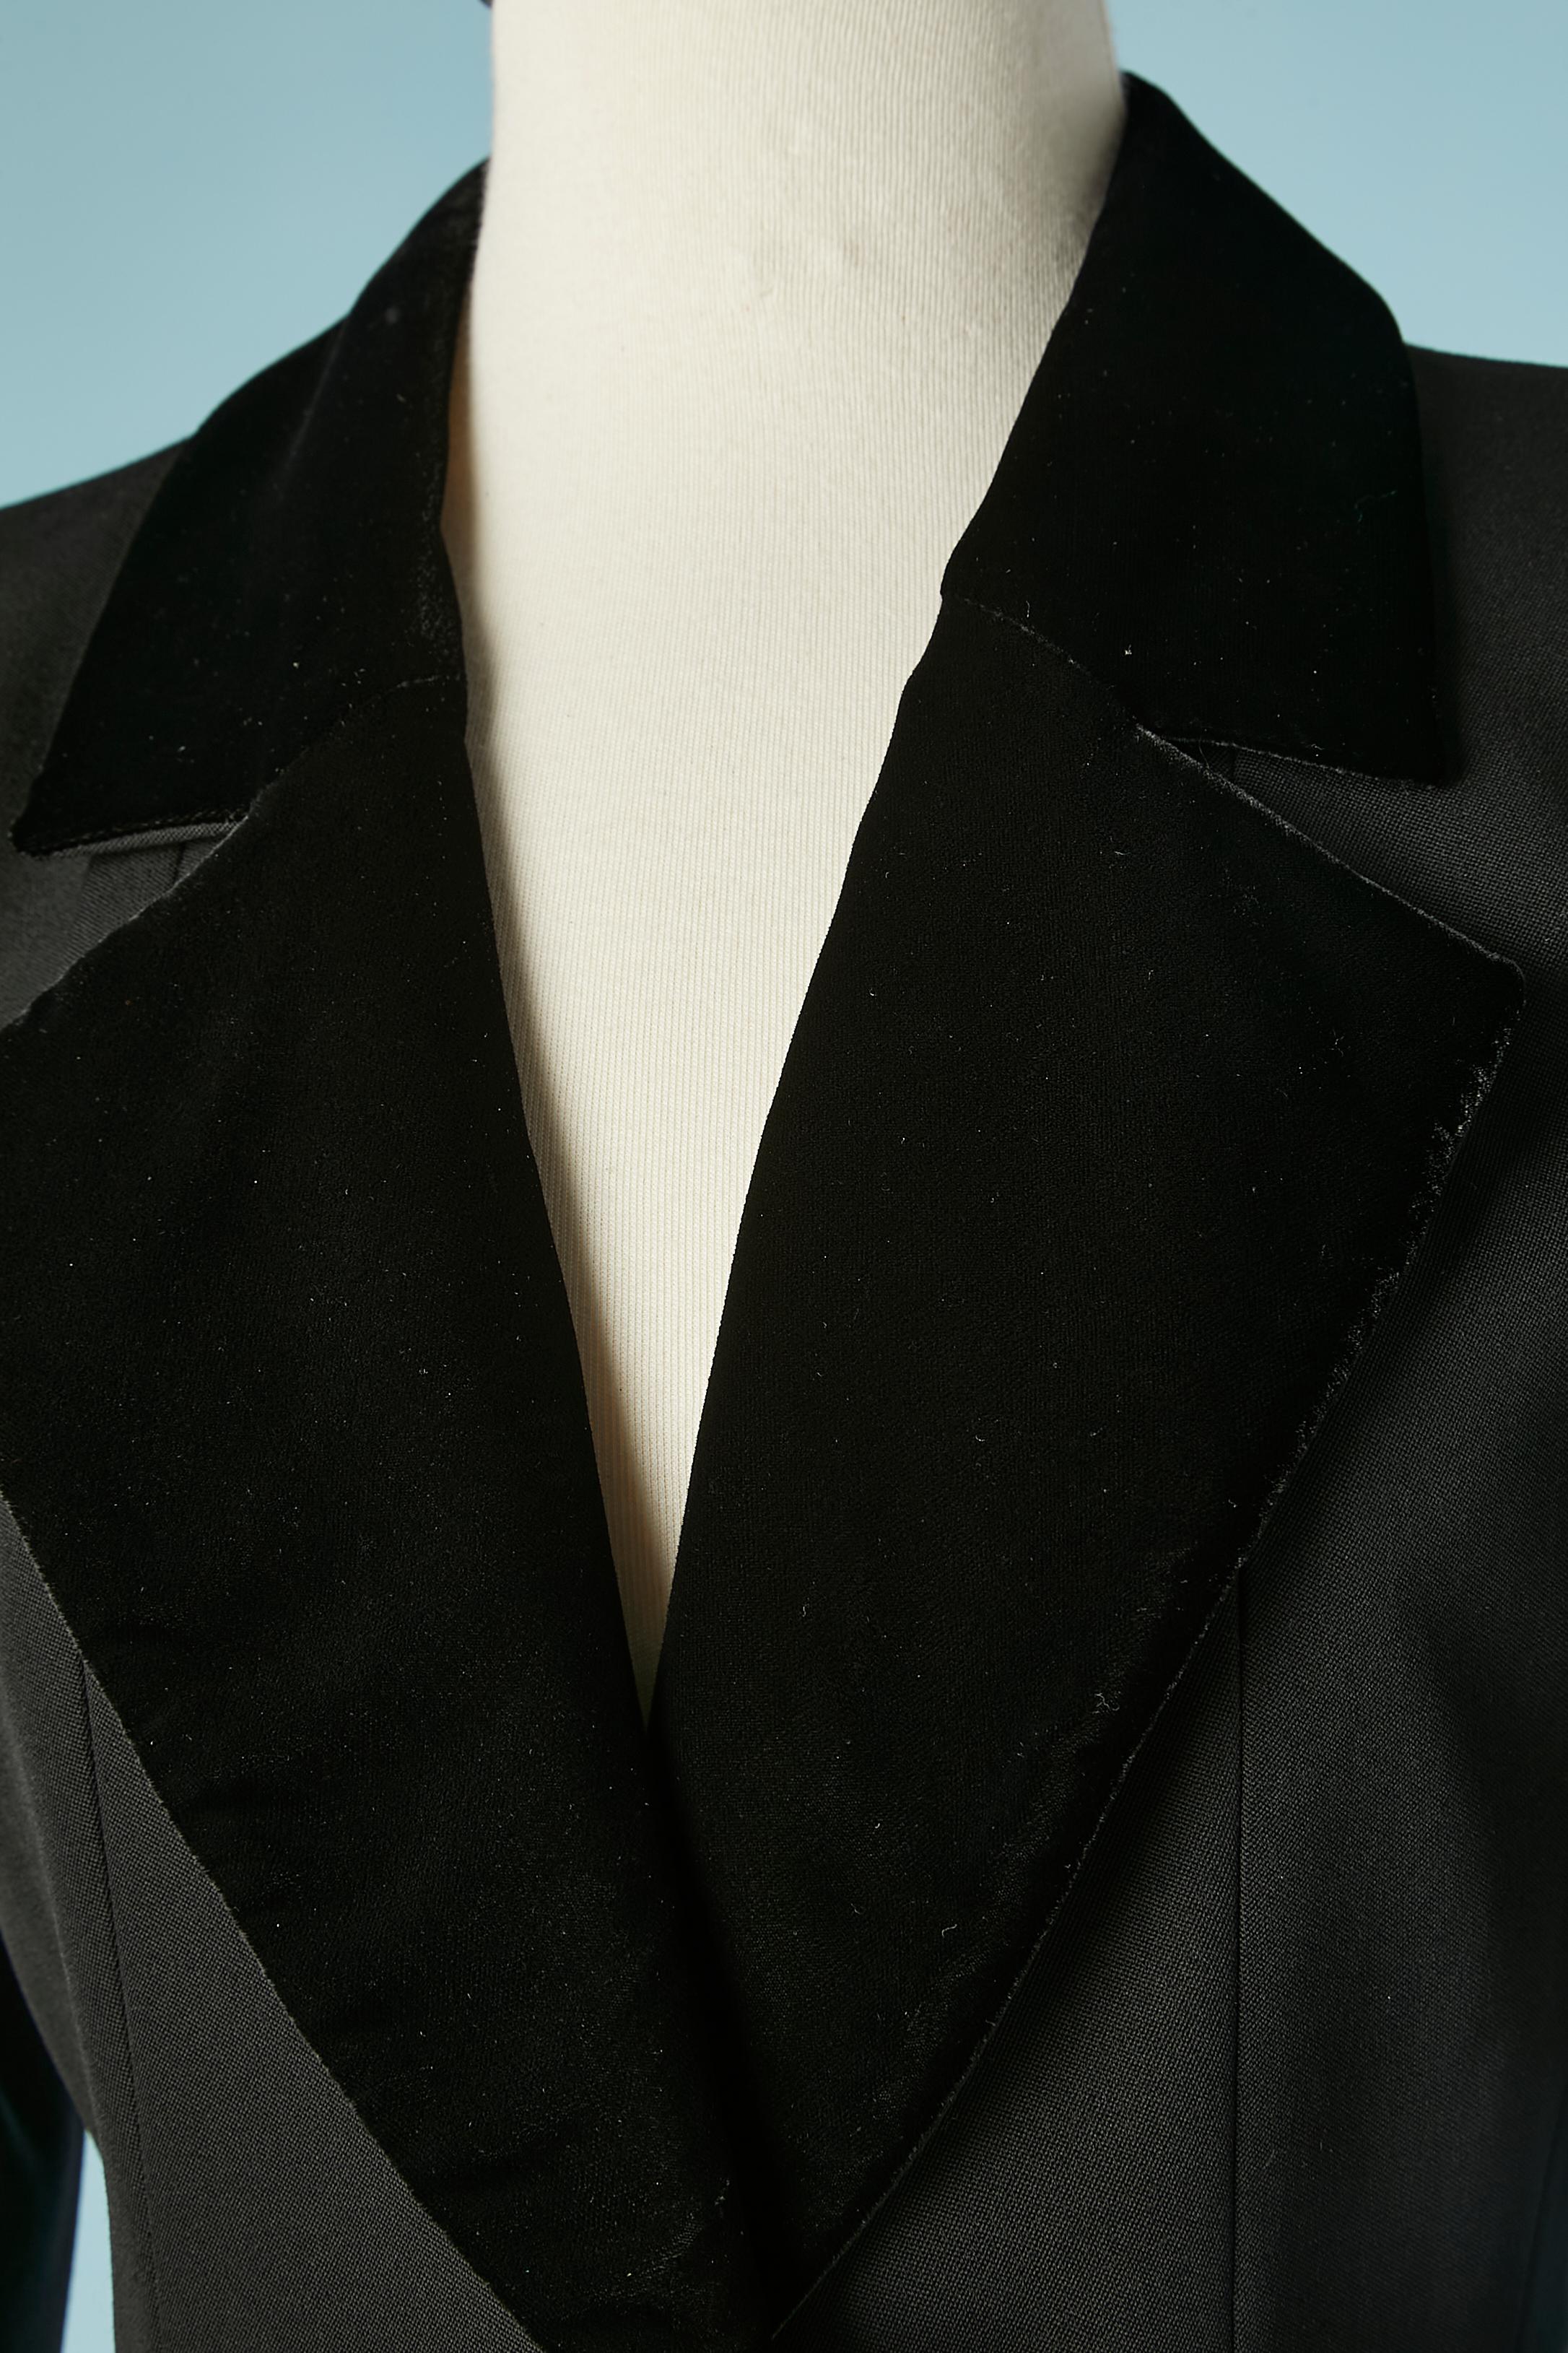 Black wool evening jacket with velvet collar and rhinestone buttons. Satin lining. Shoulder pads.
SIZE 34 (Fr) 4/6 US / S